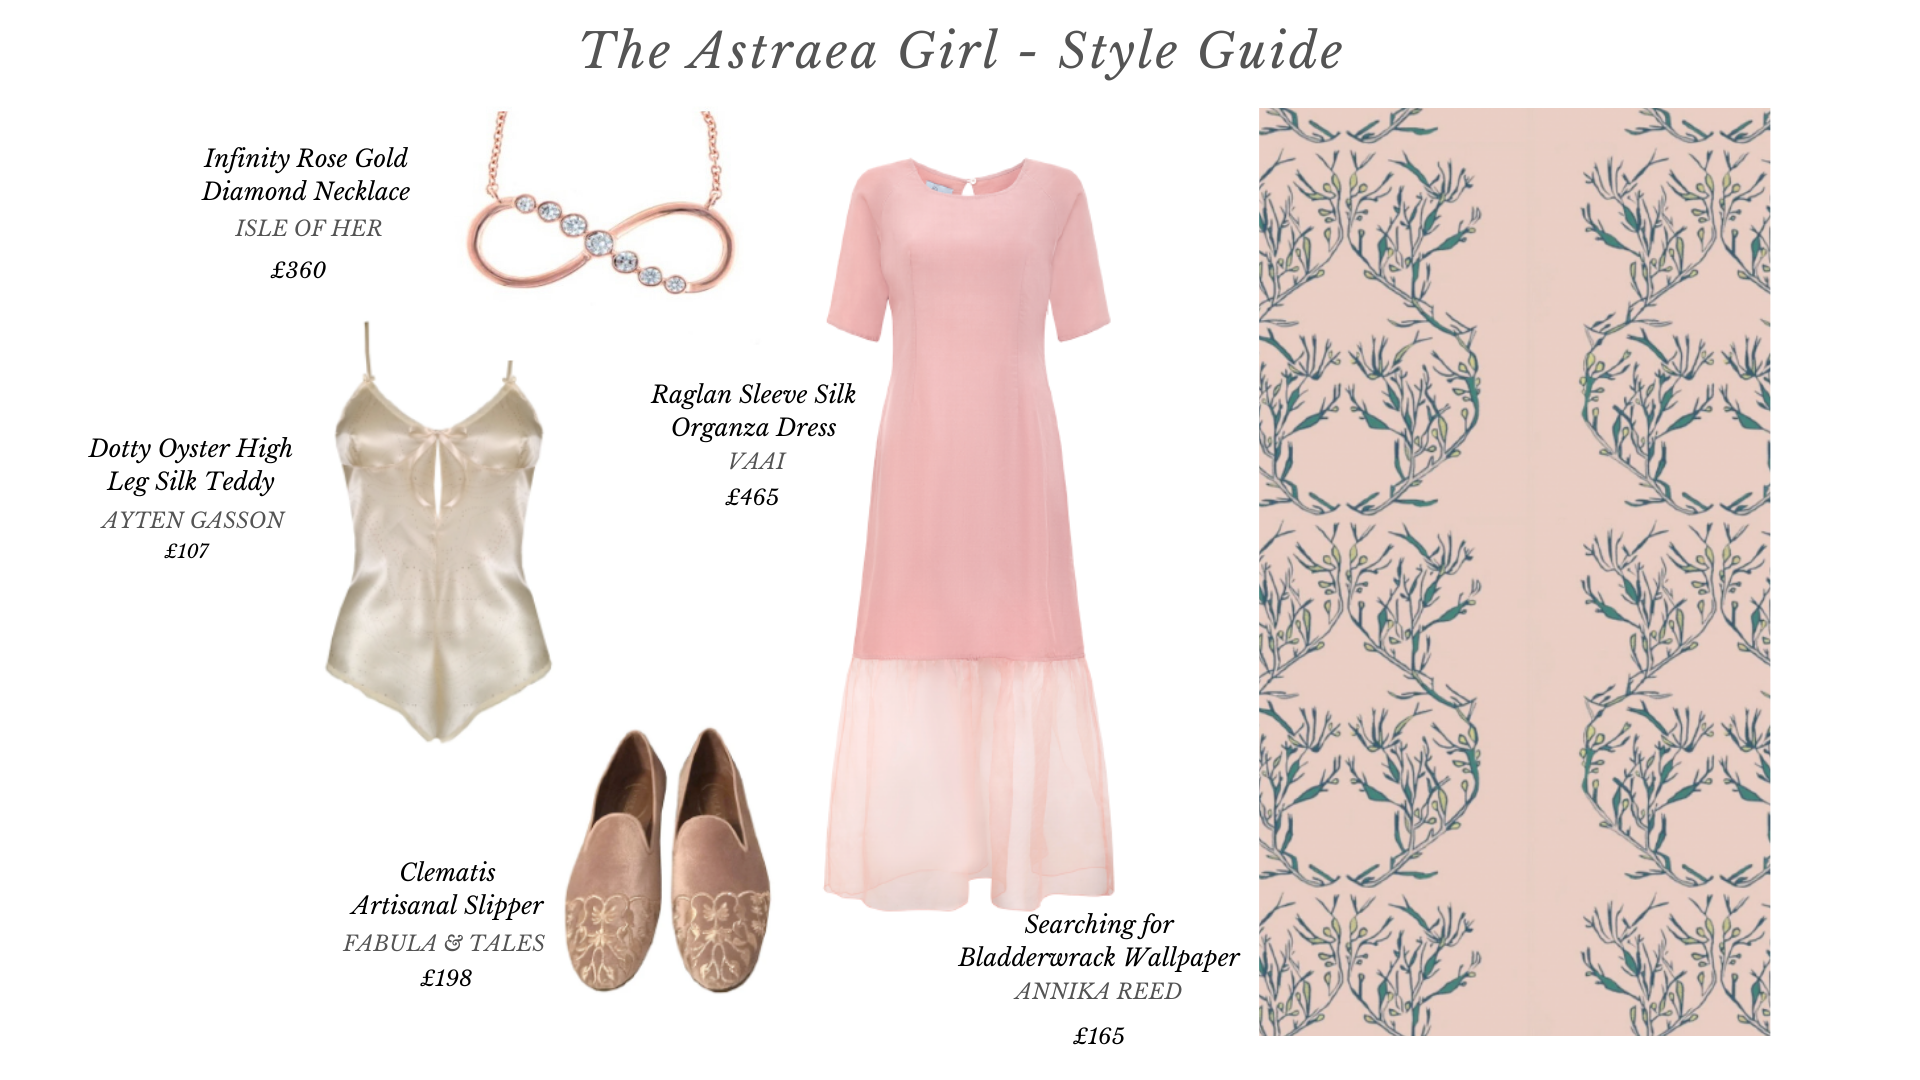 Isle of Her Spring Style Guide Astraea